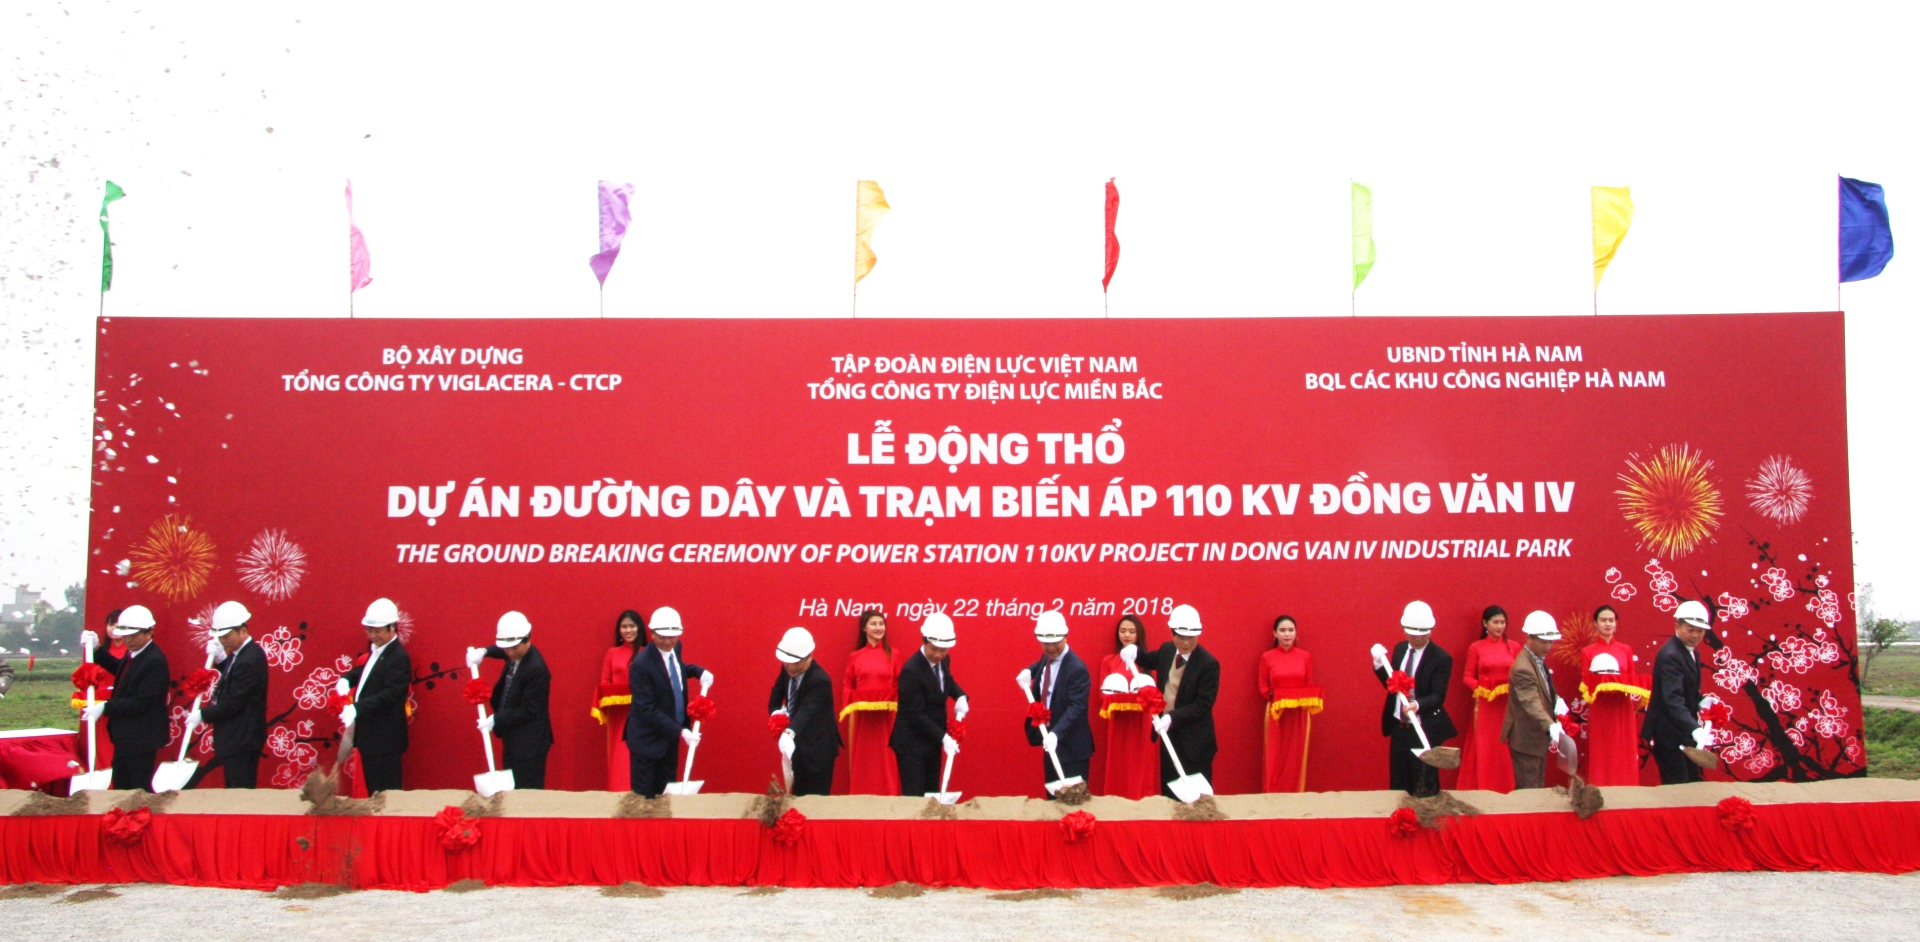 Viglacera held ground-breaking ceremony of power station plan 110kV project and wastewater treatment plant project in Dong Van IV Industrial Park